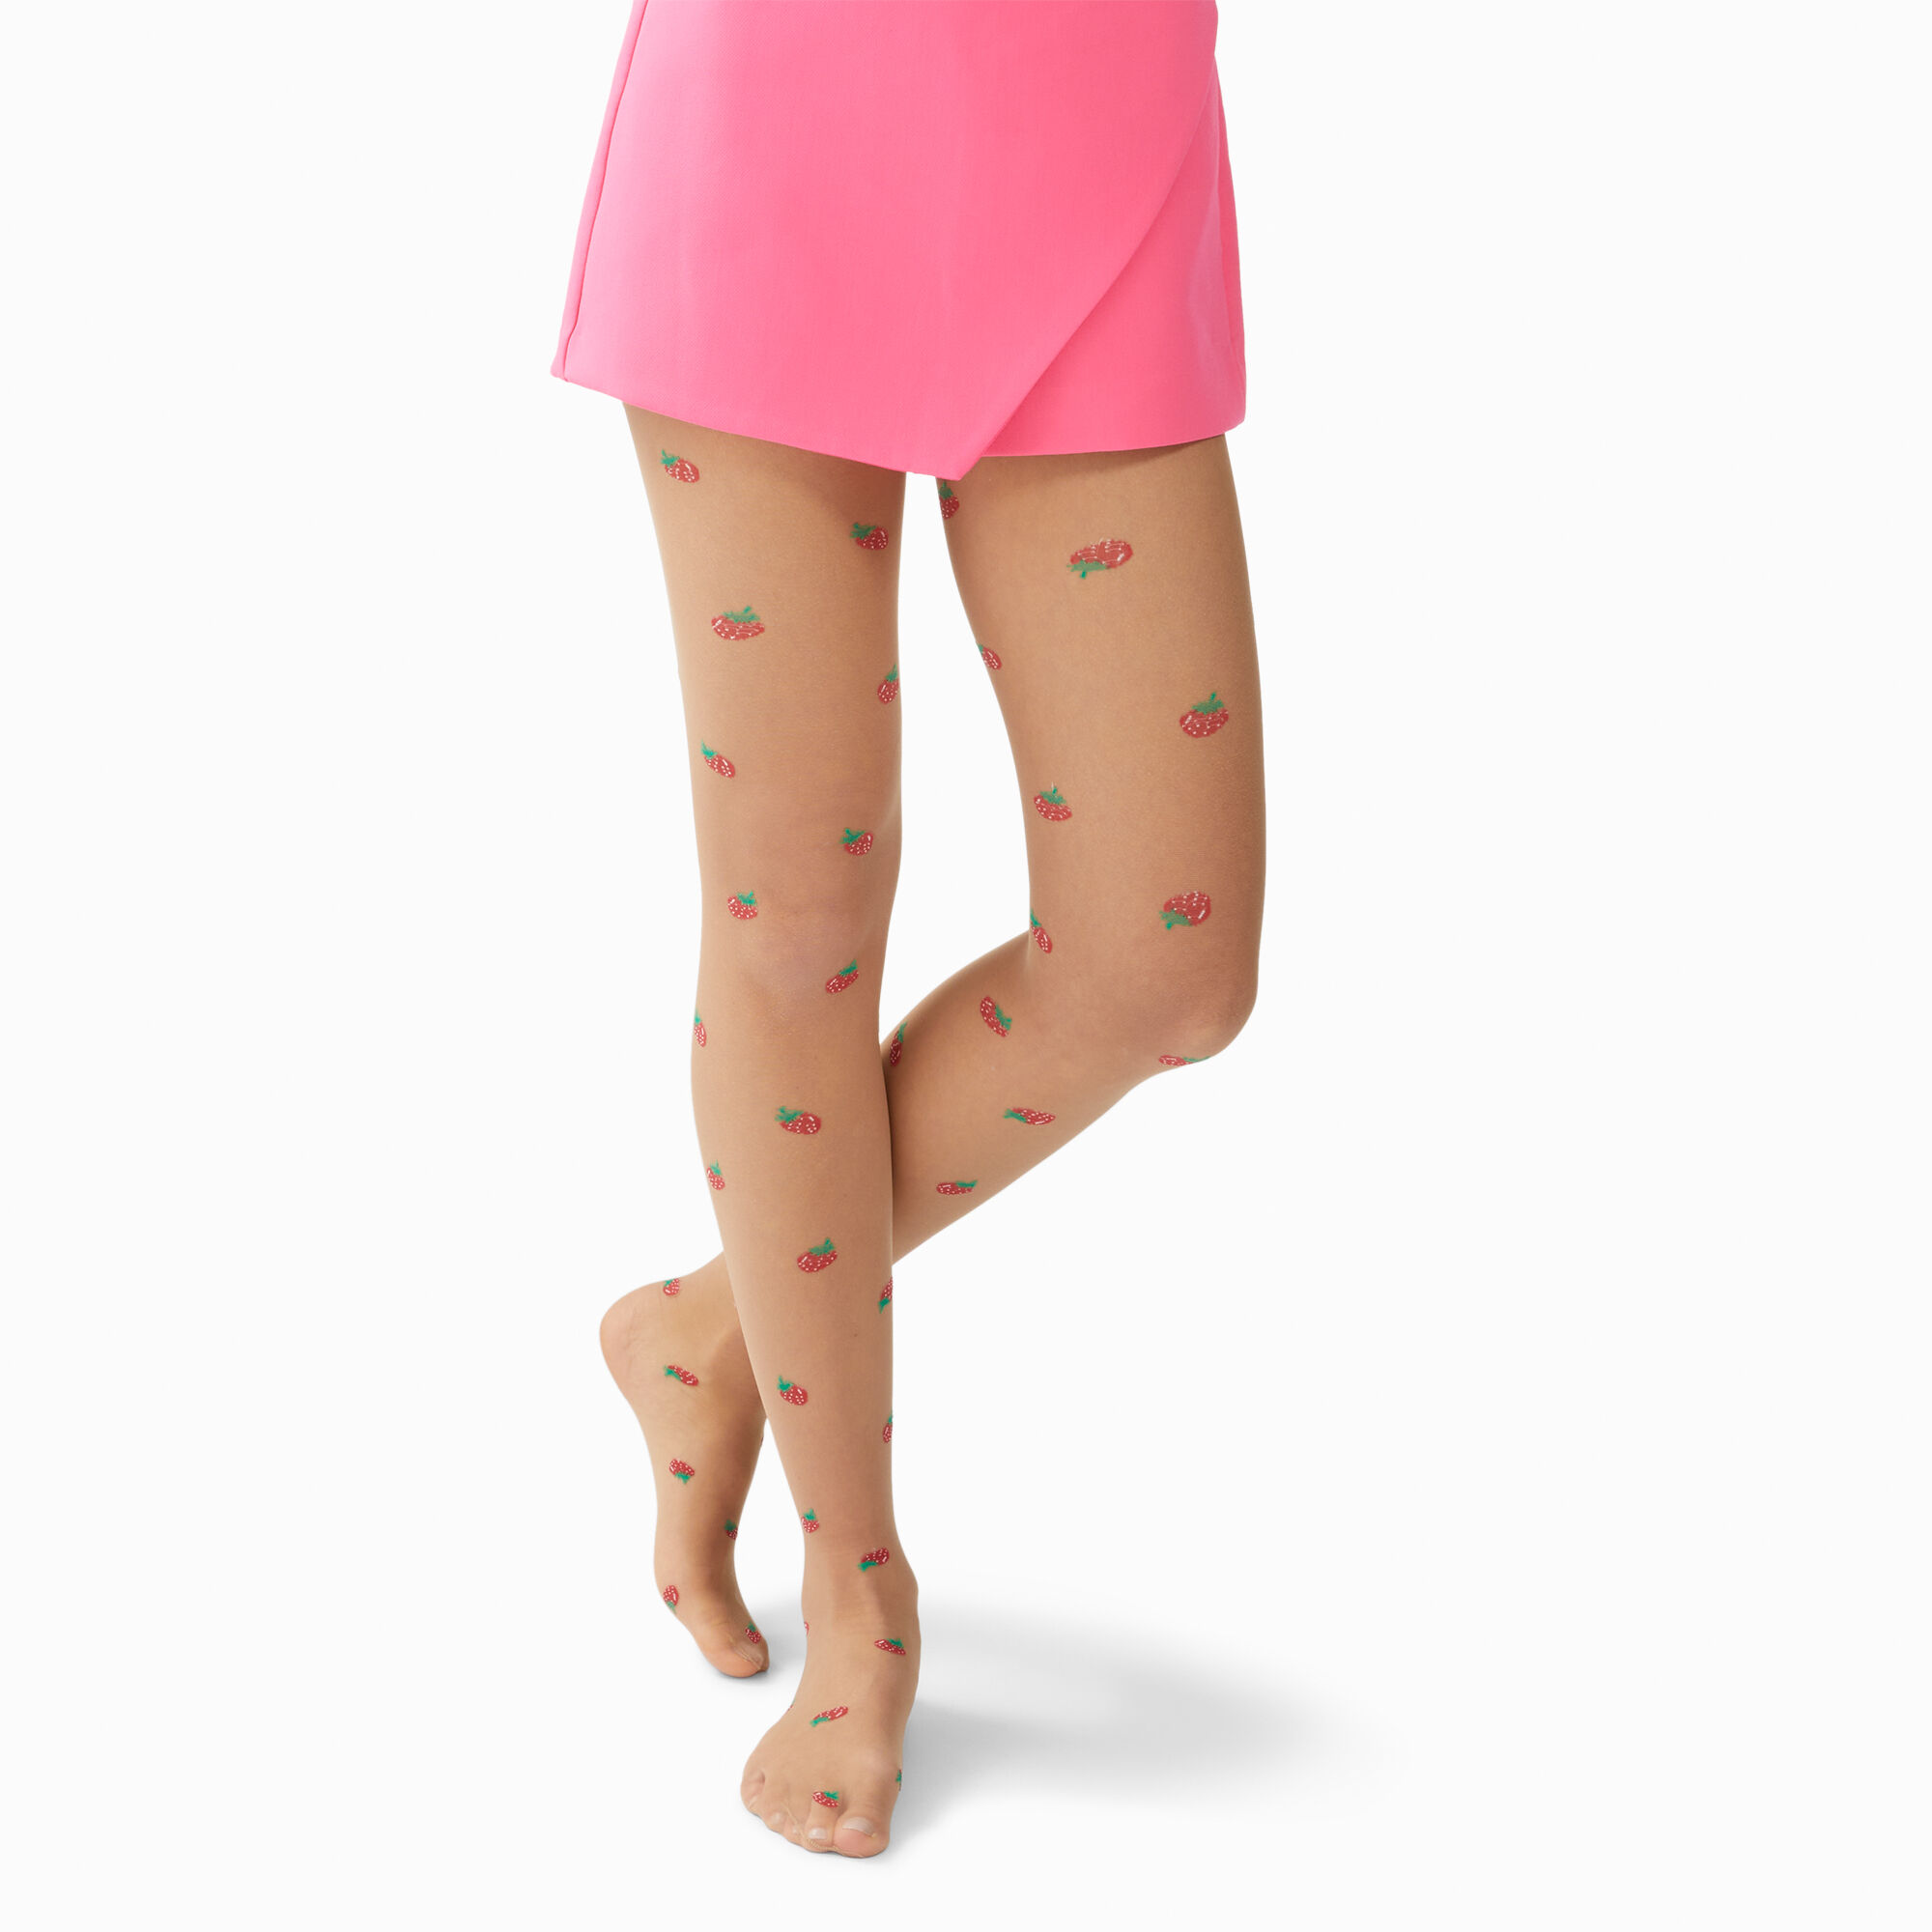 View Claires Strawberries Tan Tights Sm Red information